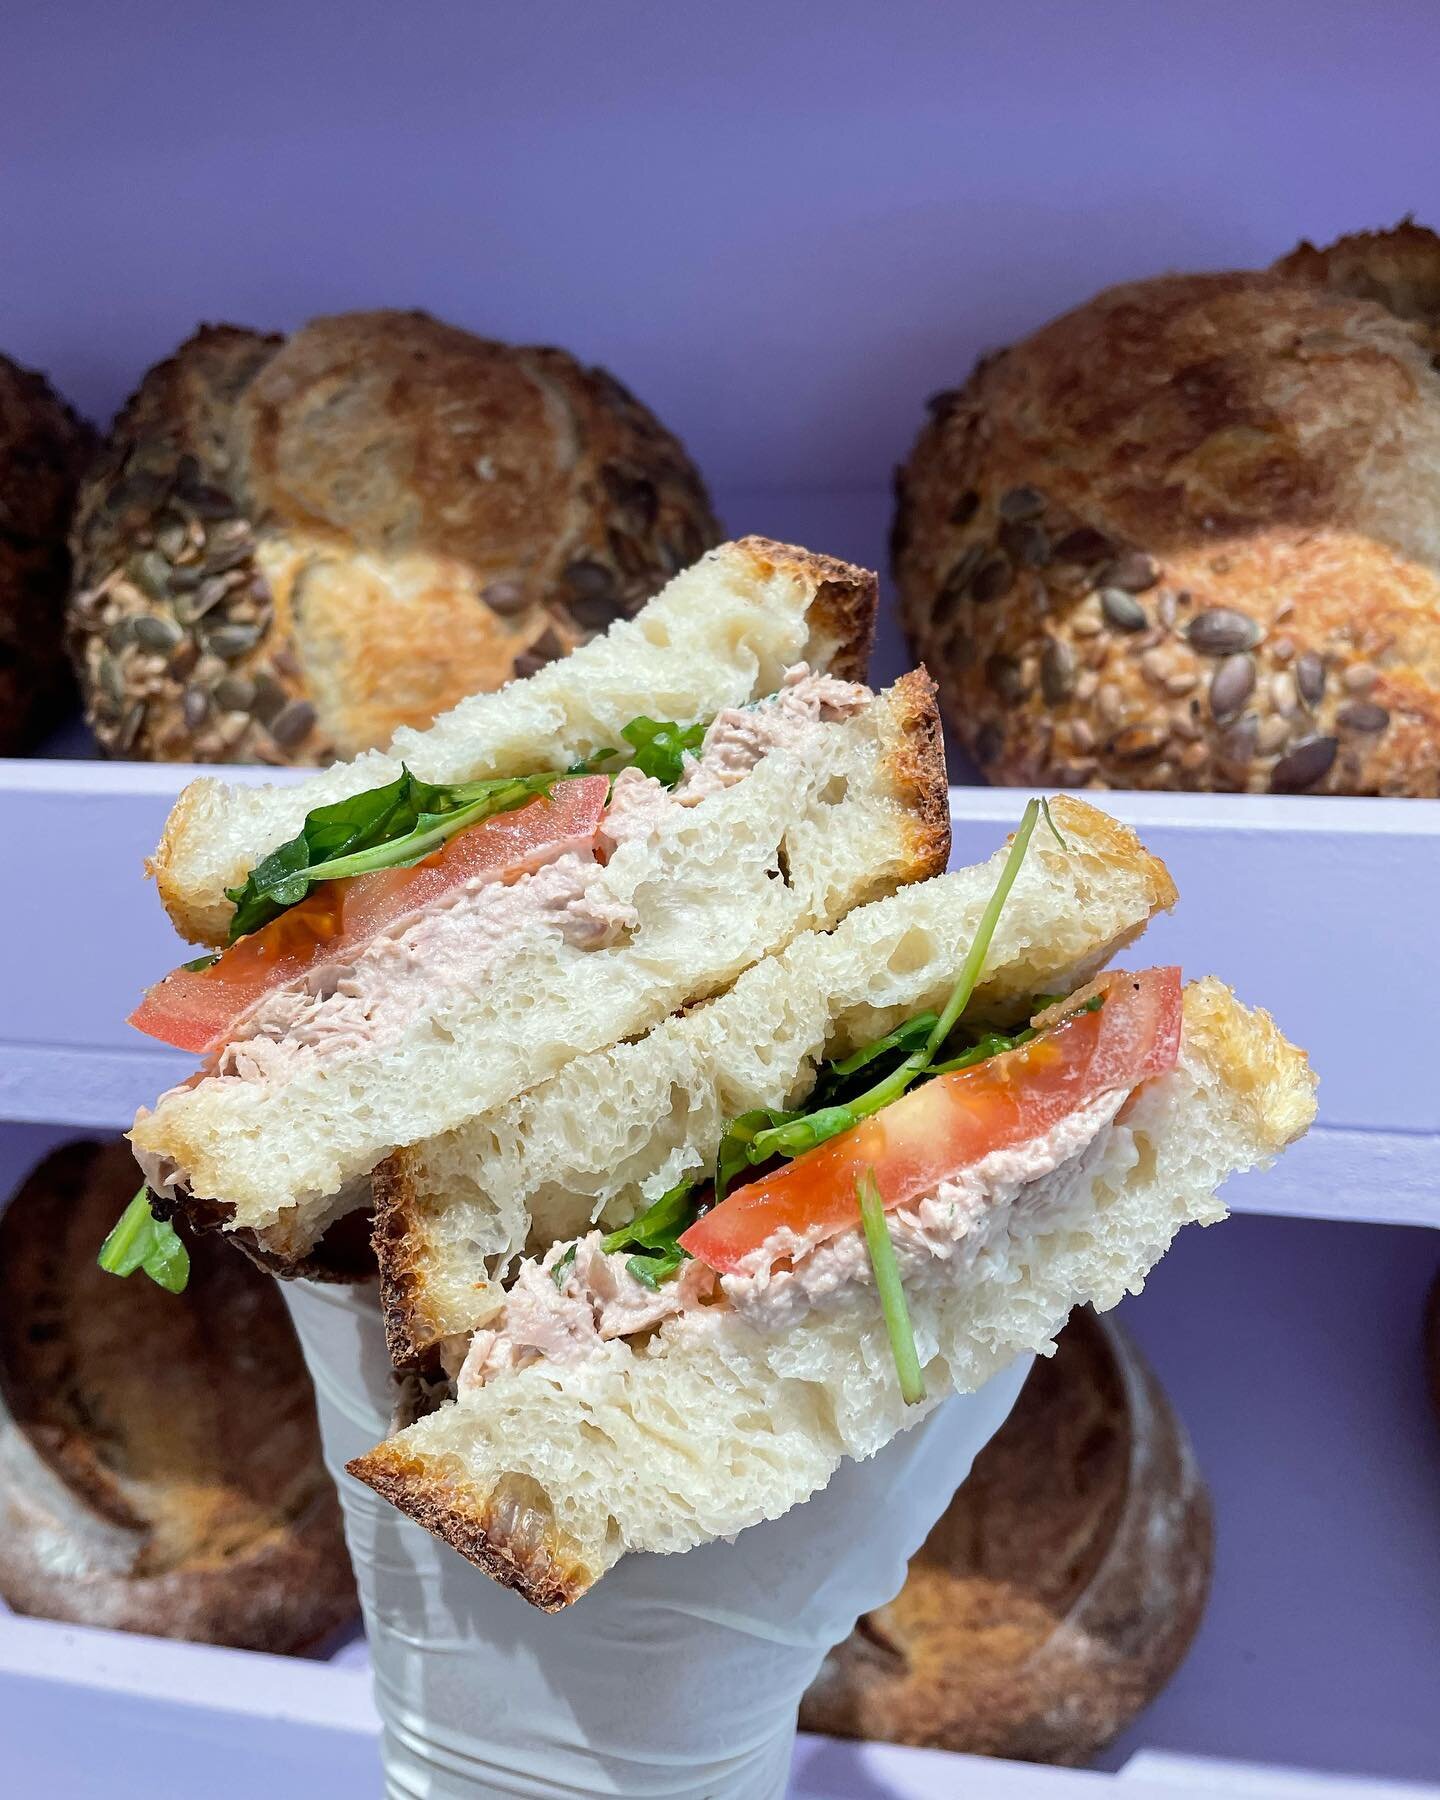 Marylebone! We have got your lunch sorted now! Tuna and tomato, Mozzarella, tomato and Pesto, BLT, Chickpea vegan sandwich&hellip;You name it! Freshly made in the morning with our beautiful sourdough.
See you soon!